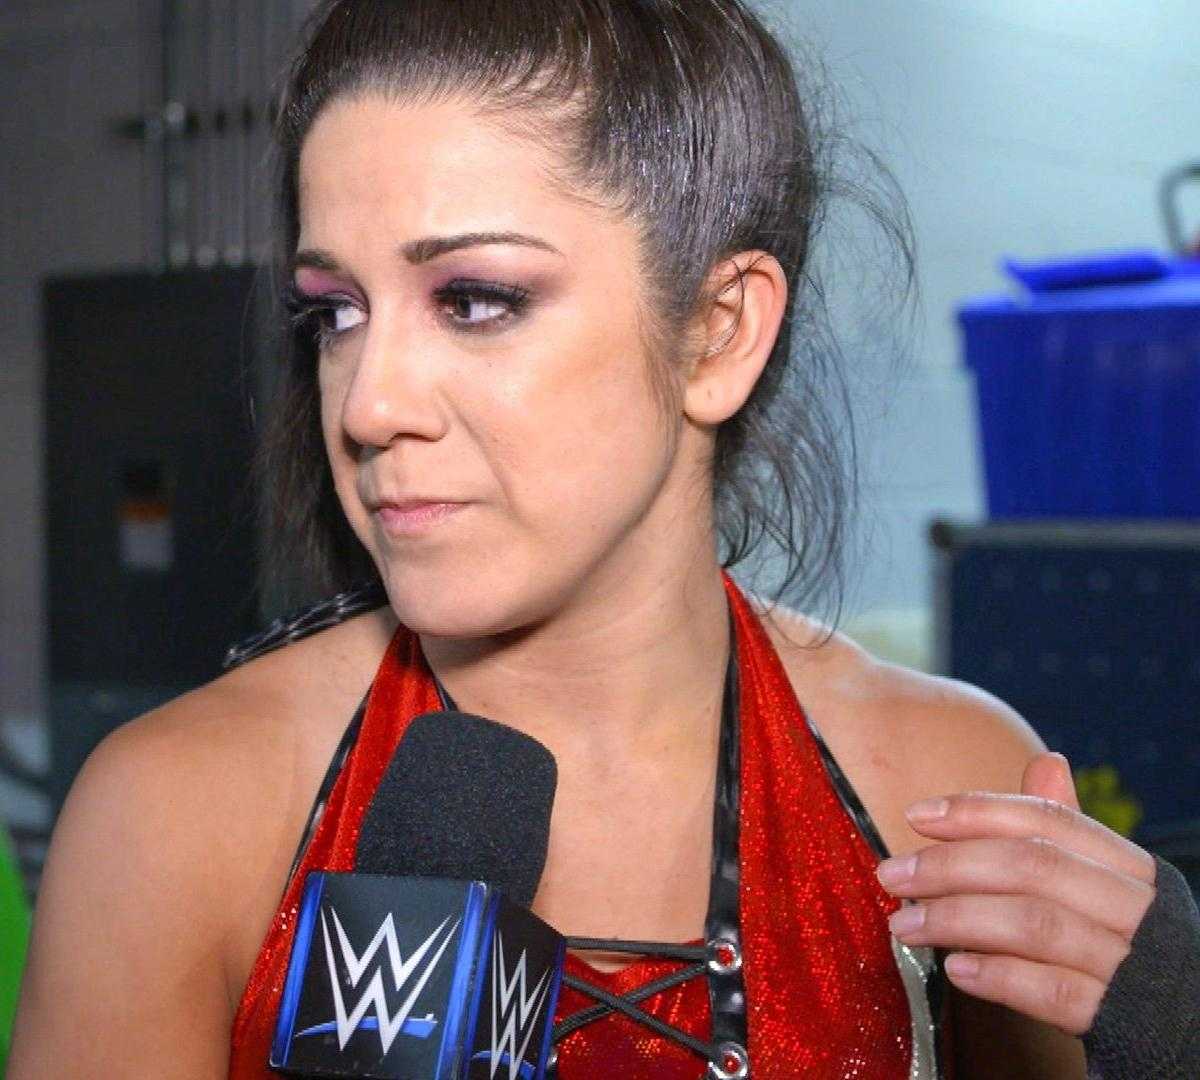 70+ Hot Pictures Of Bayley Will Hypnotise You With Her Exquisite Body 11